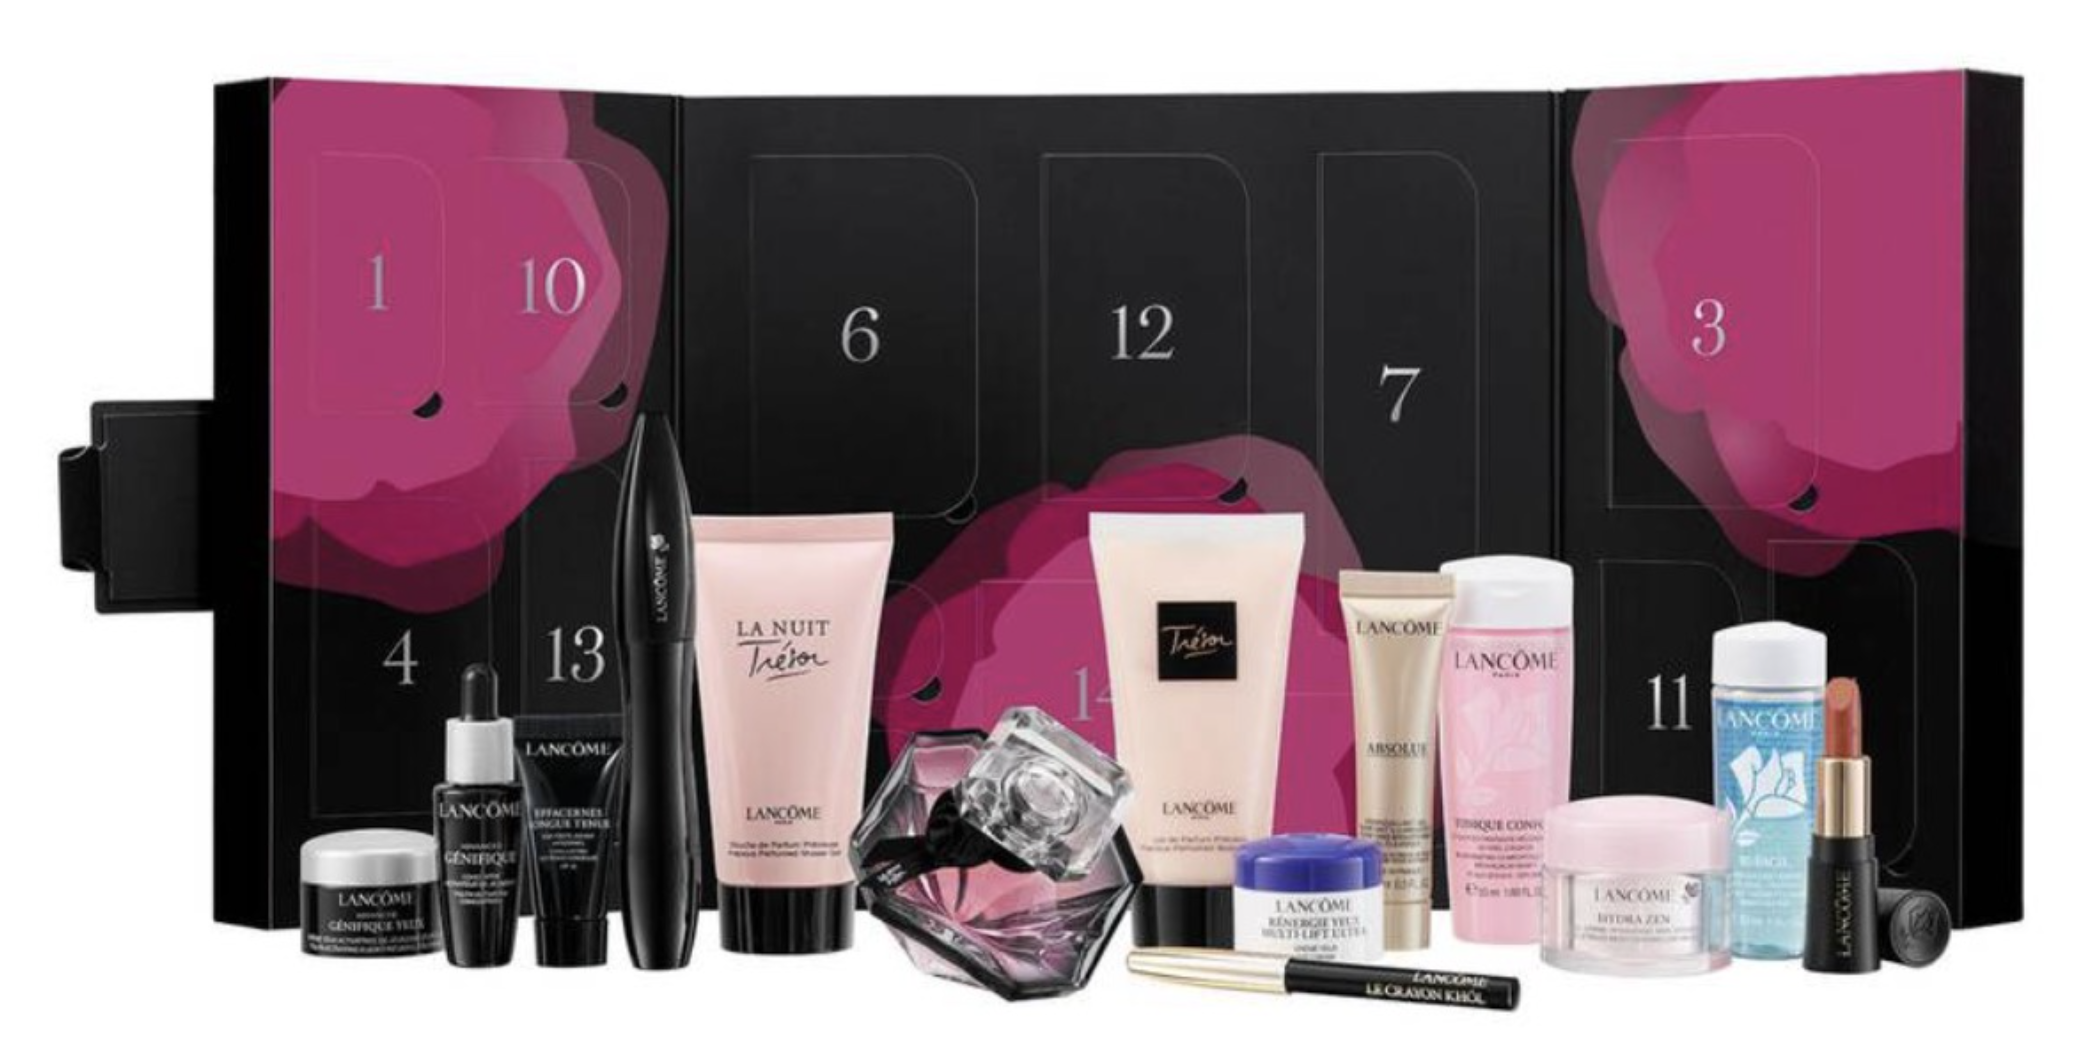 lancome.png?width=2087&height=1056&name=lancome - 20 Valentine&#039;s Day Marketing Campaigns We Love